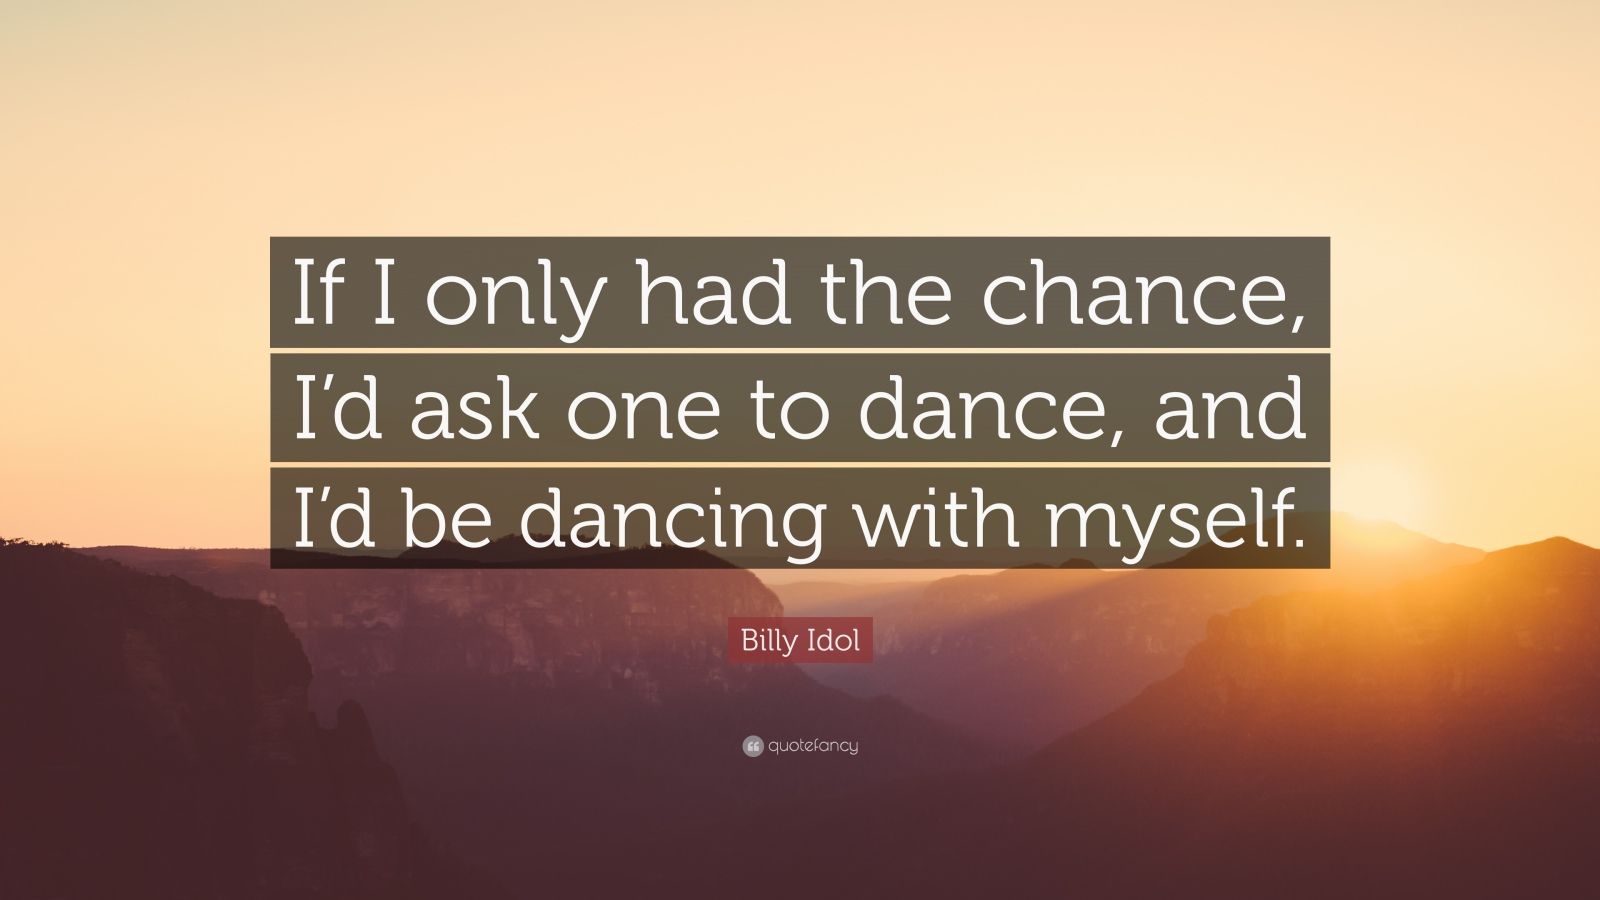 one chance to dance